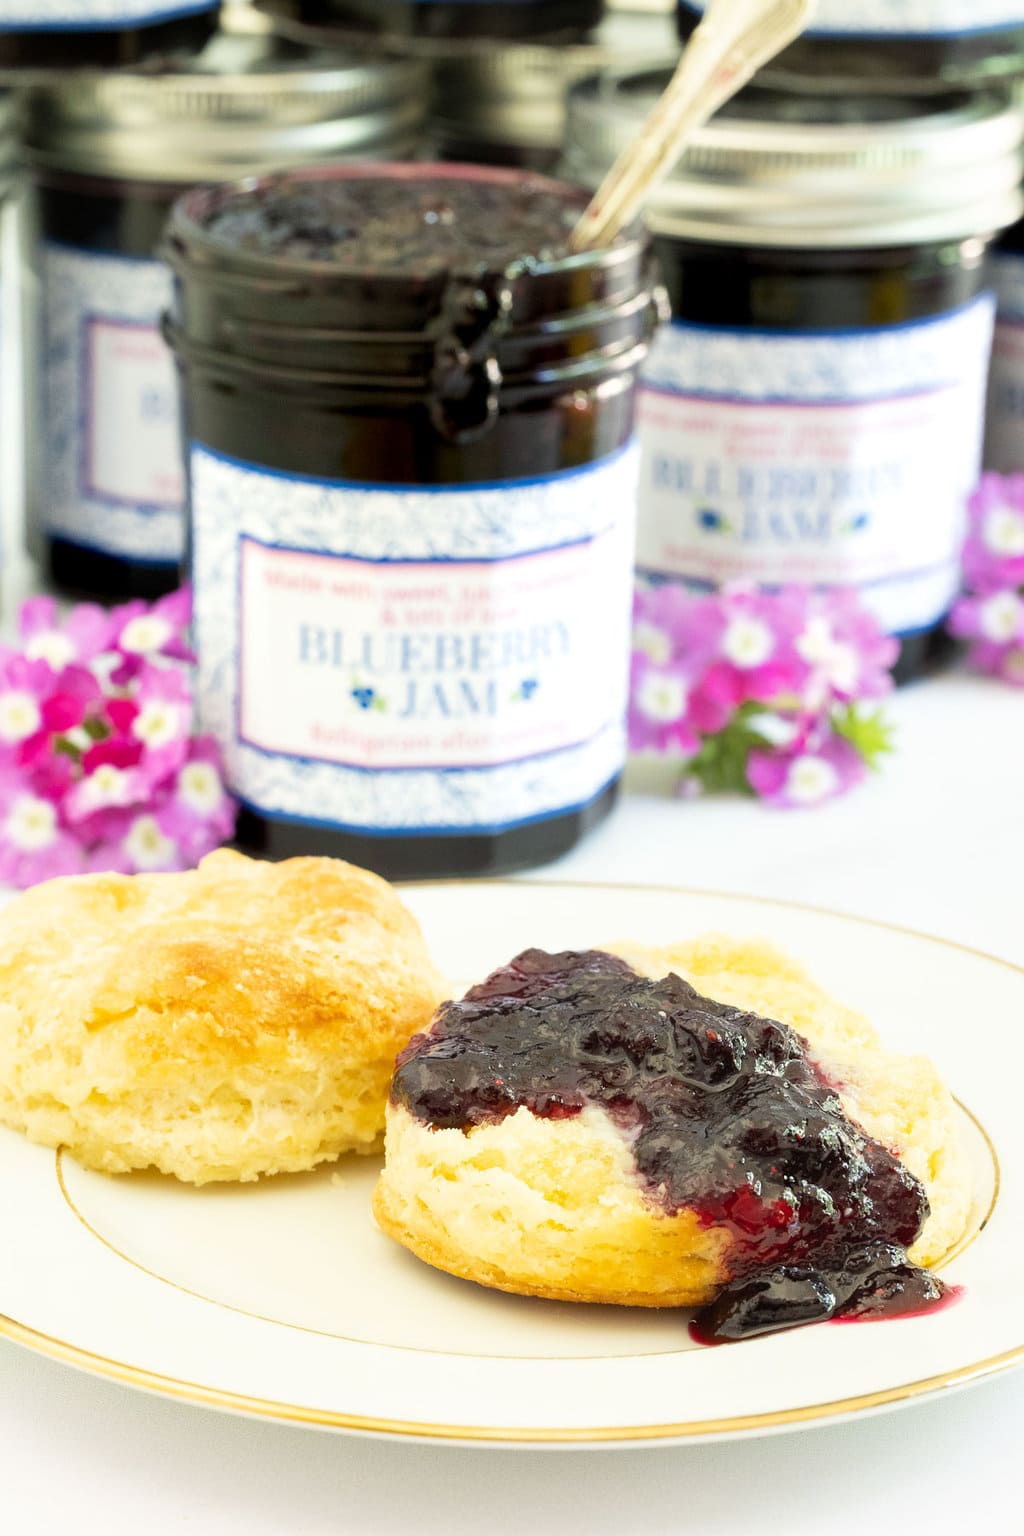 Vertical closeup photo of Blueberry Jam in glass jars in the background and a scone with the jam on a serving plate in the foreground.